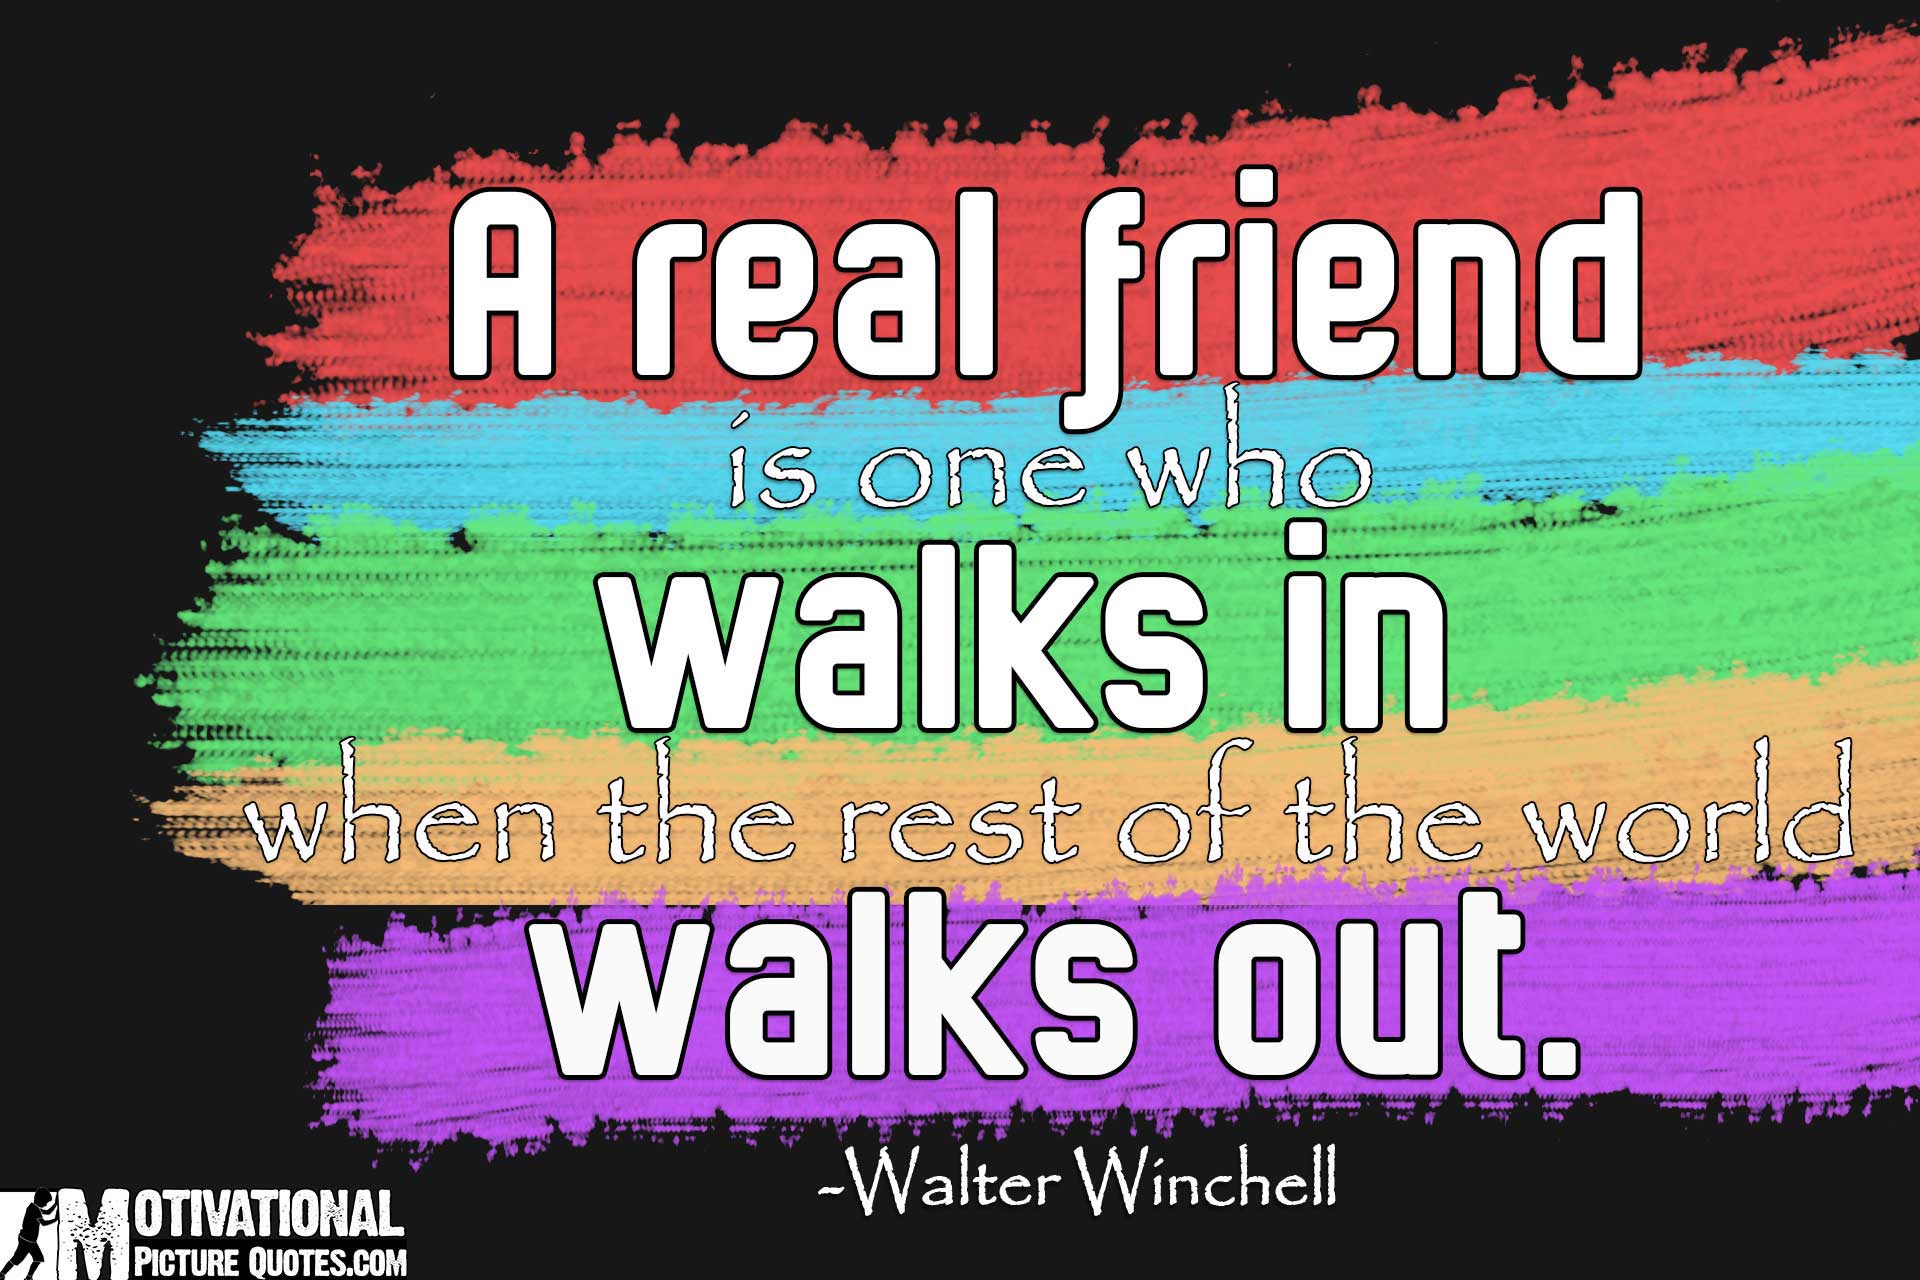 25+ Inspirational Friendship Quotes Images | Free Download Friendship